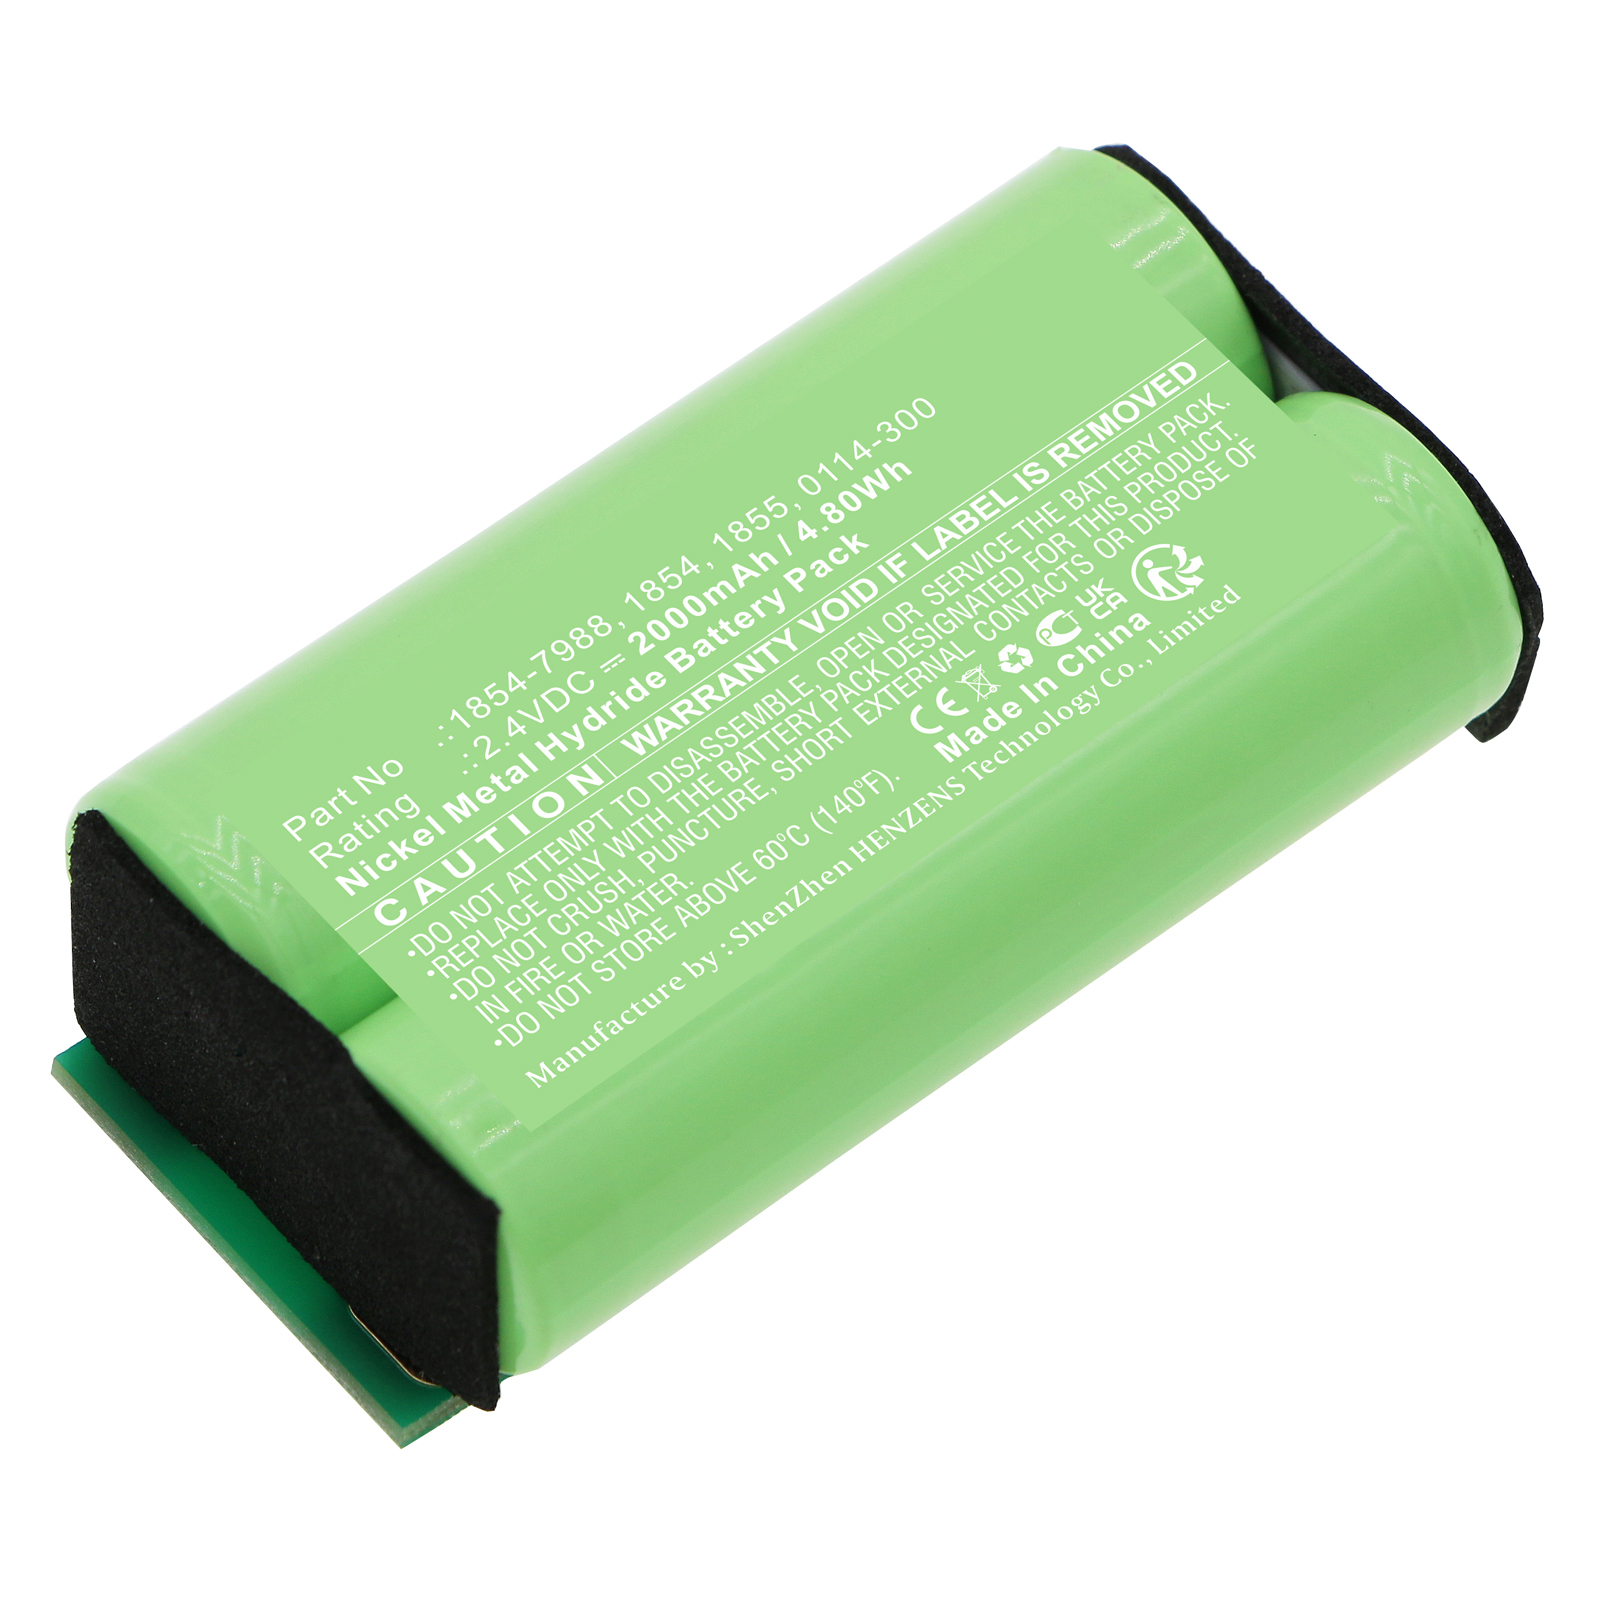 Batteries for WahlShaver